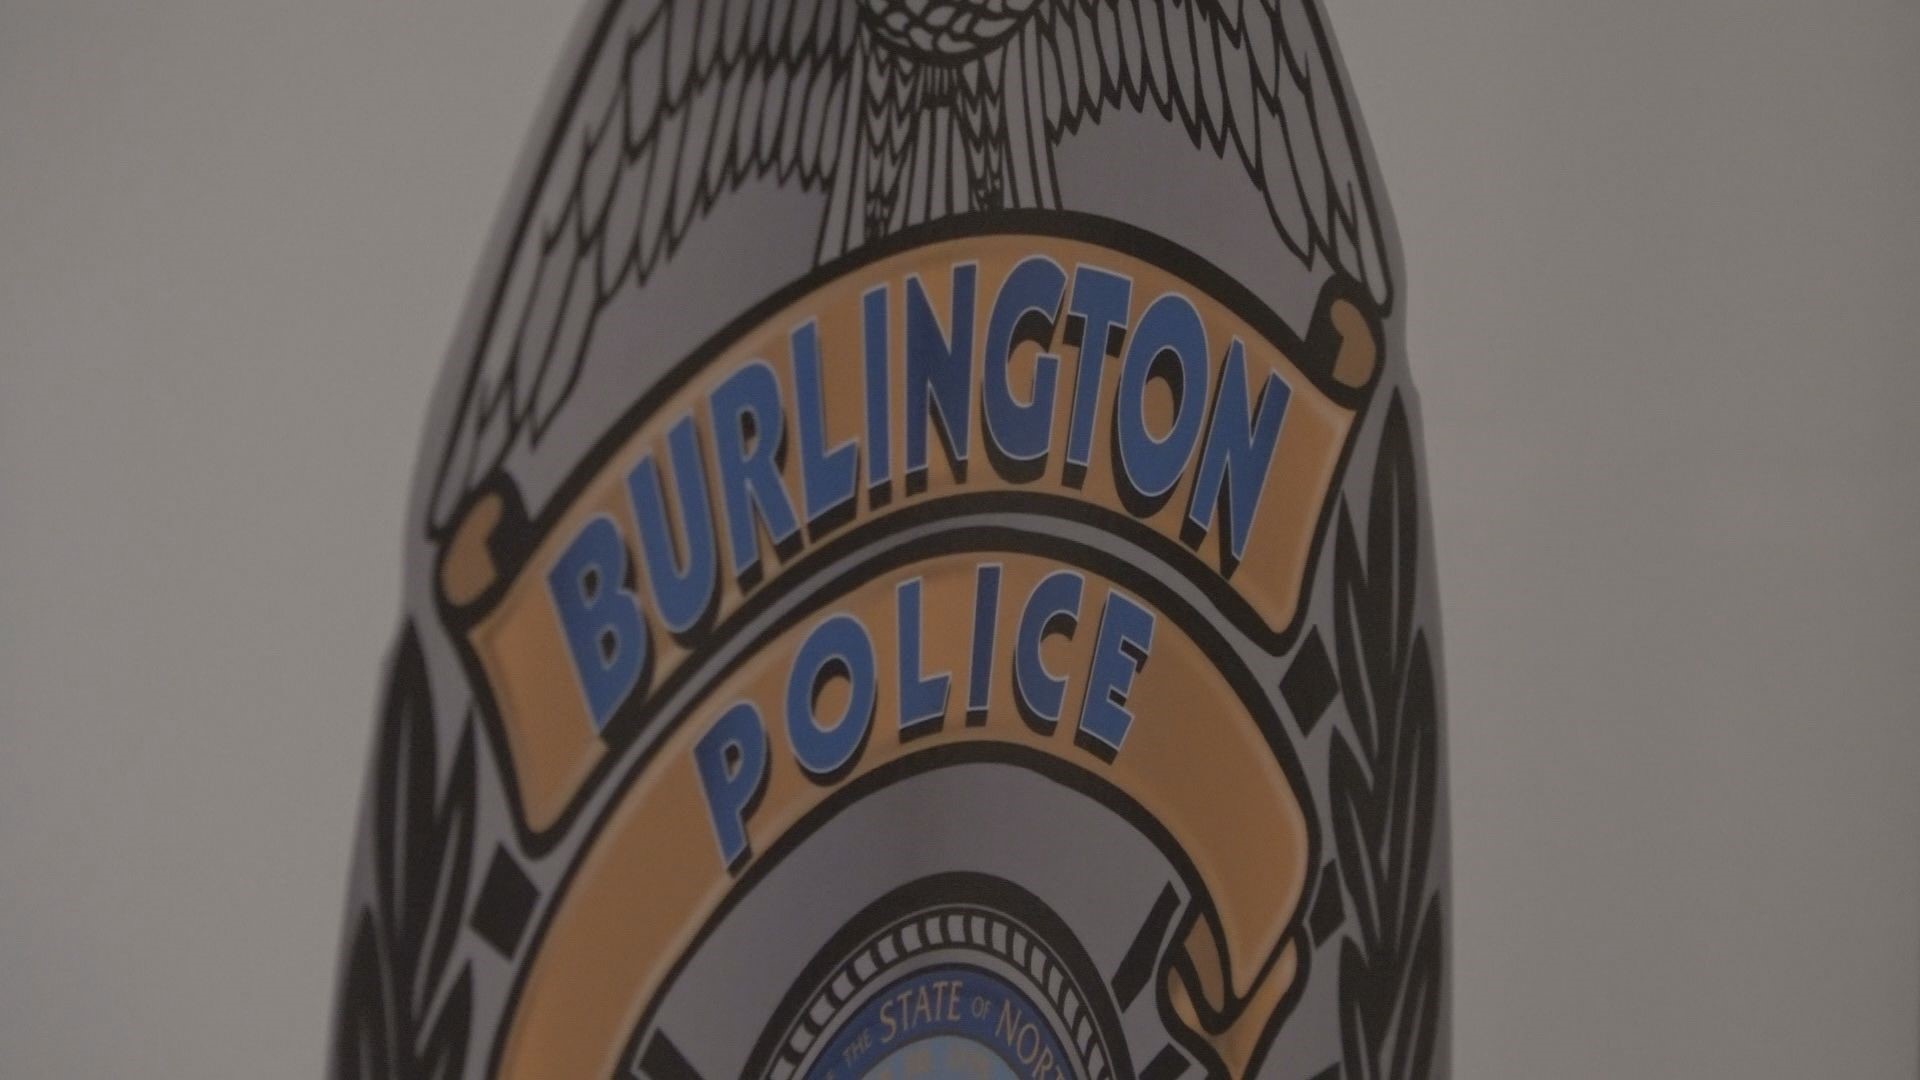 Two more overdoses reported in Burlington bringing total to 5 since Friday morning.